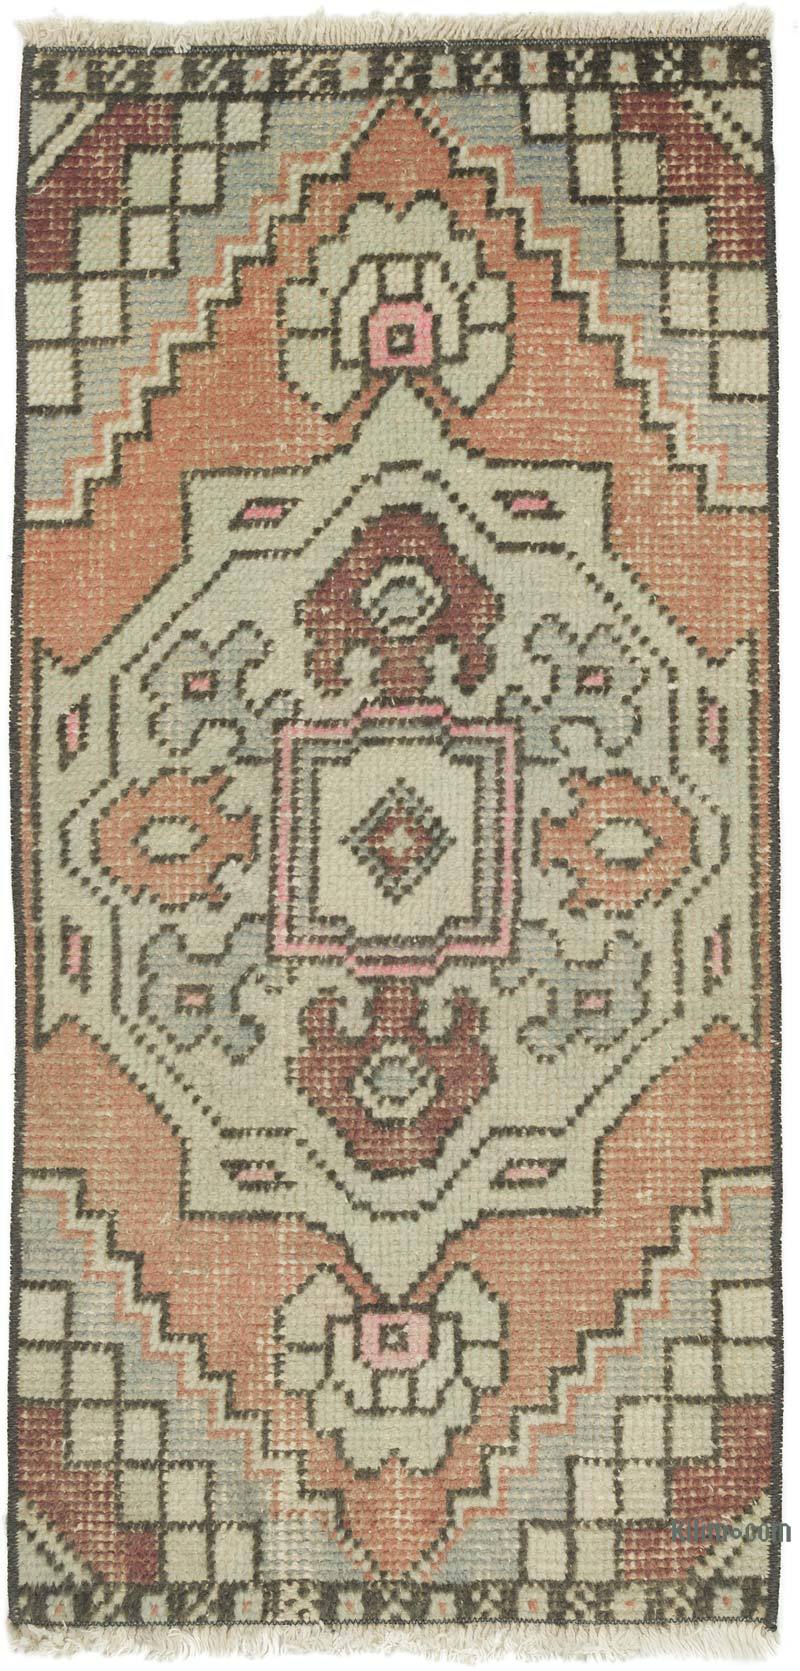 Vintage Turkish Hand-Knotted Rug - 1' 5" x 2' 10" (17 in. x 34 in.) - K0057156